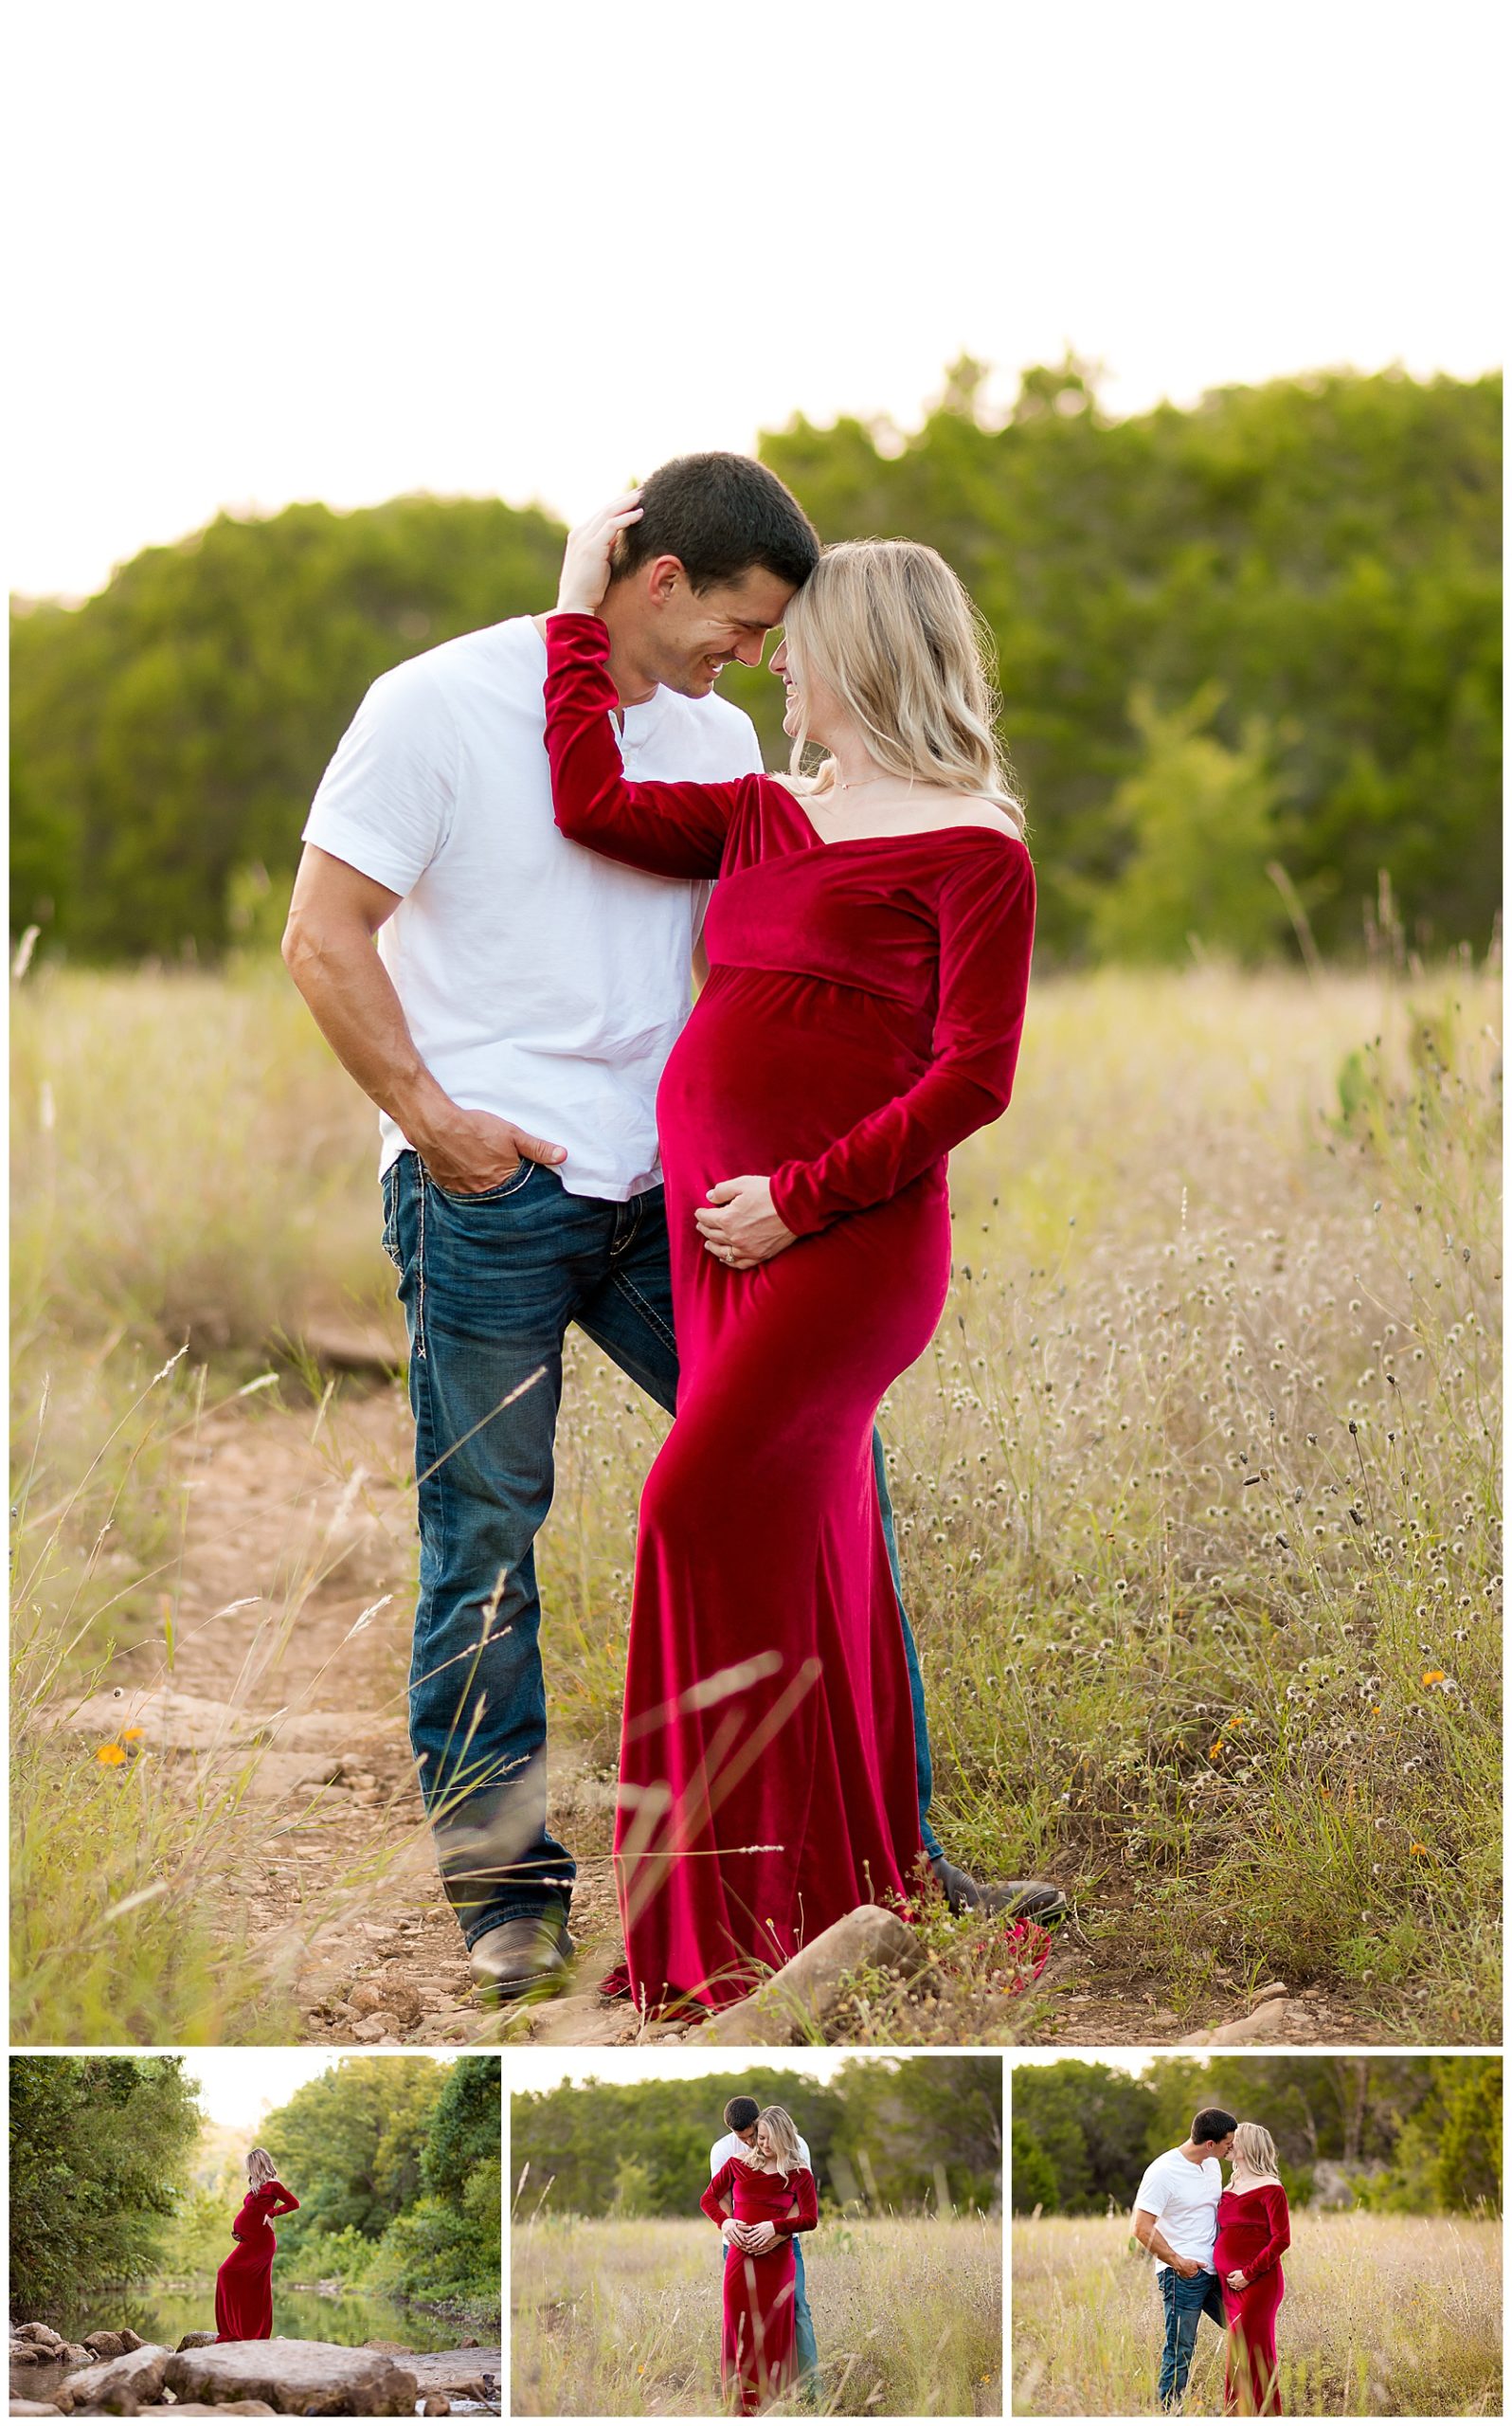 Maternity photo of a woman in a red velvet dress